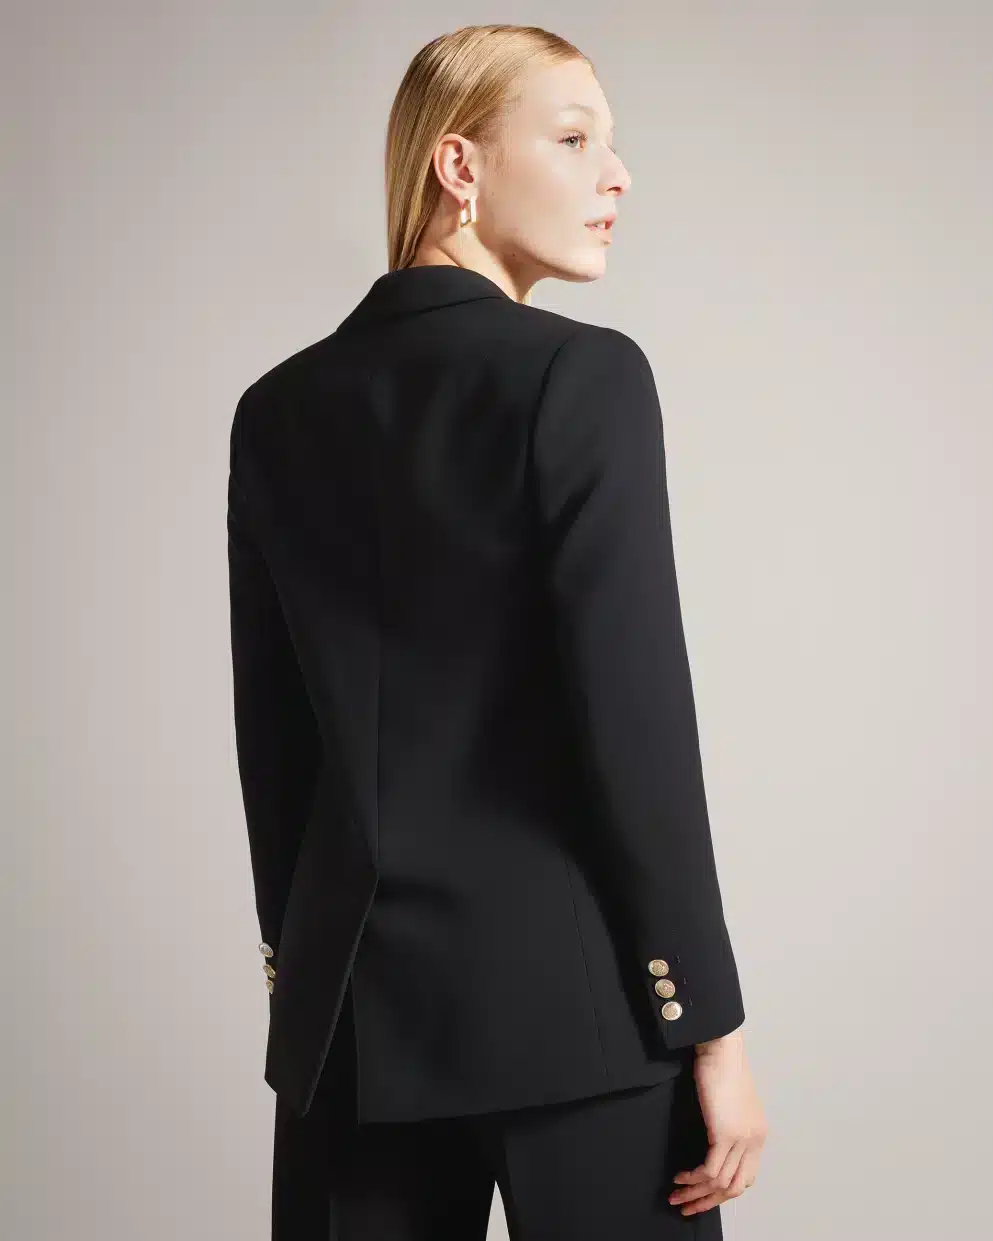 Ted Baker Black Llayladouble Breasted Jacket